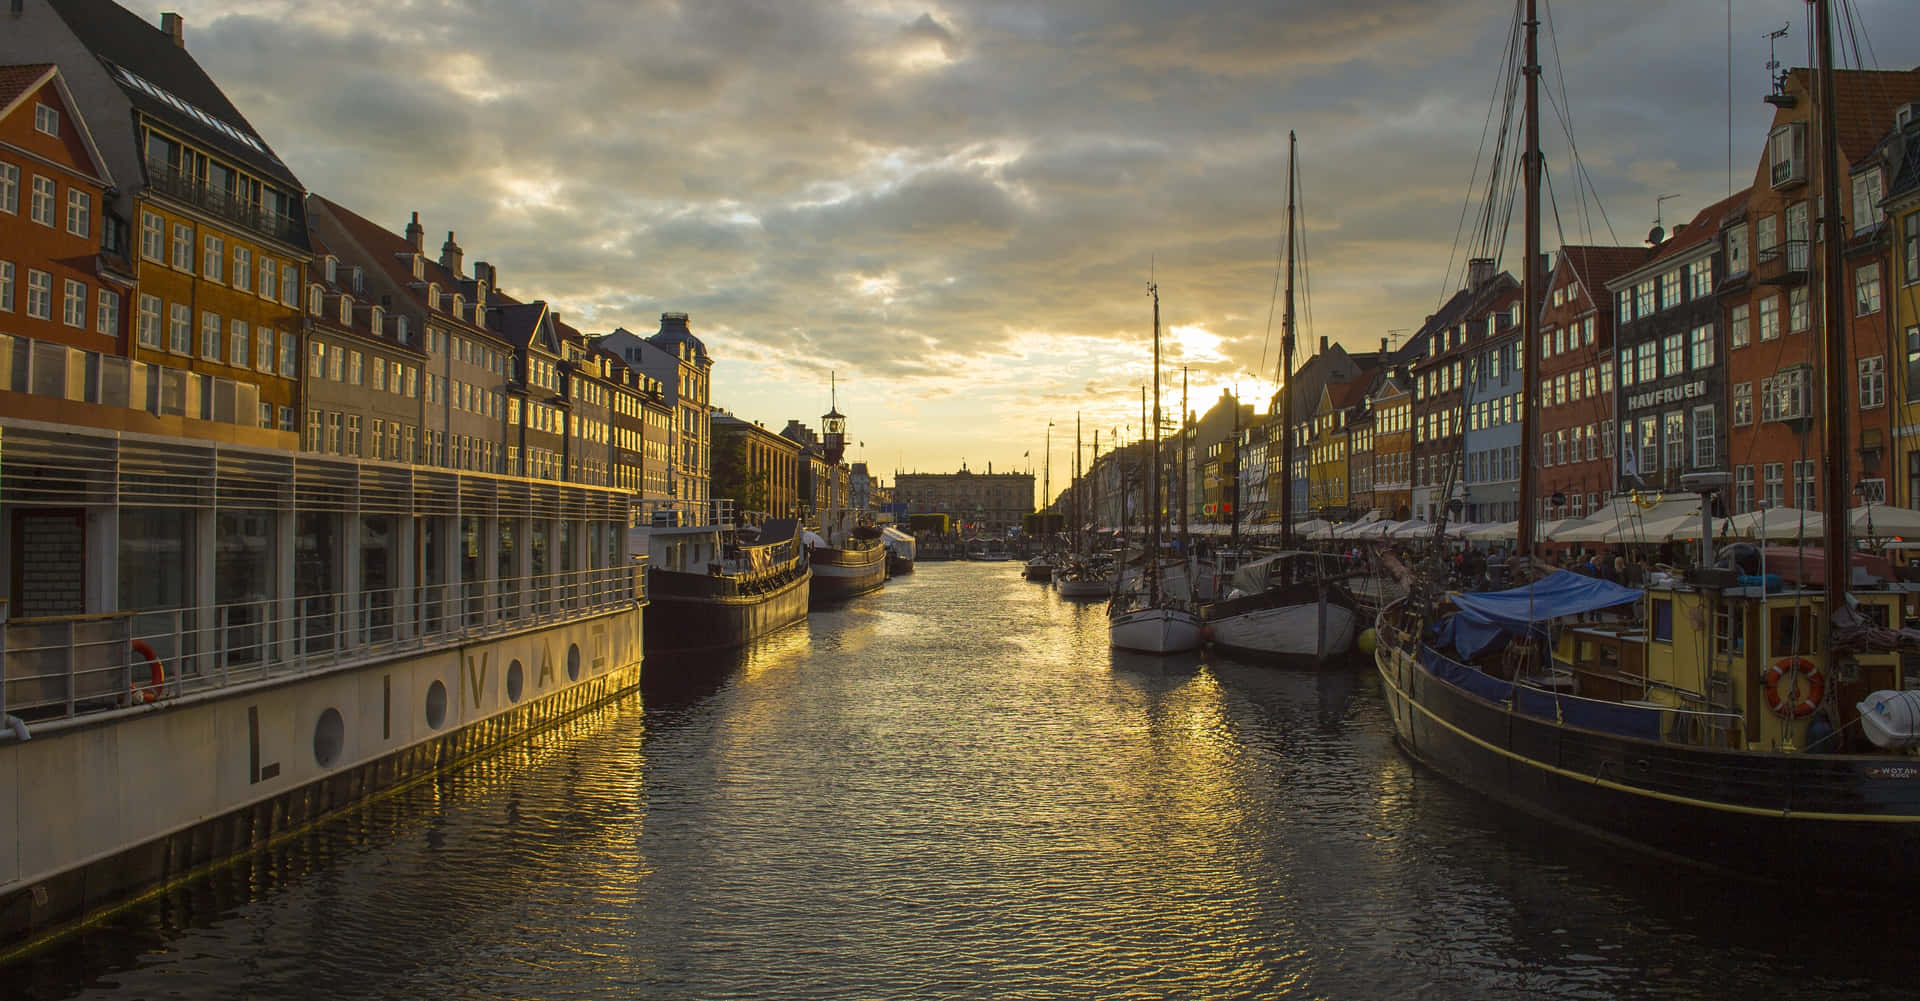 "Picturesque Nyhavn Port From Kongens Nytorv to Royal Playhouse" Wallpaper